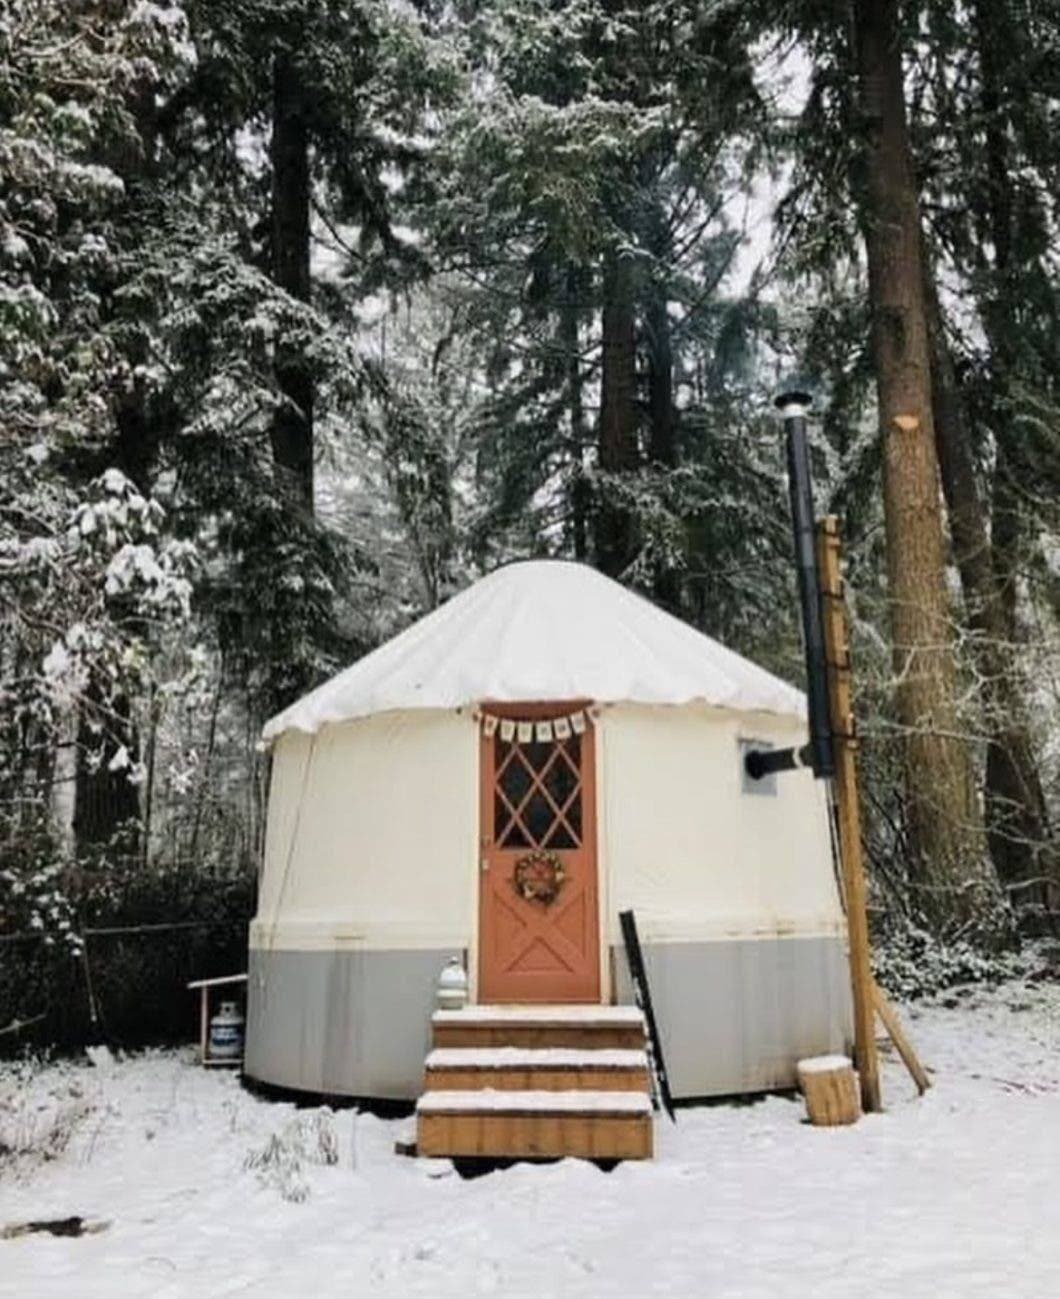 Talyce's yurt in the snow